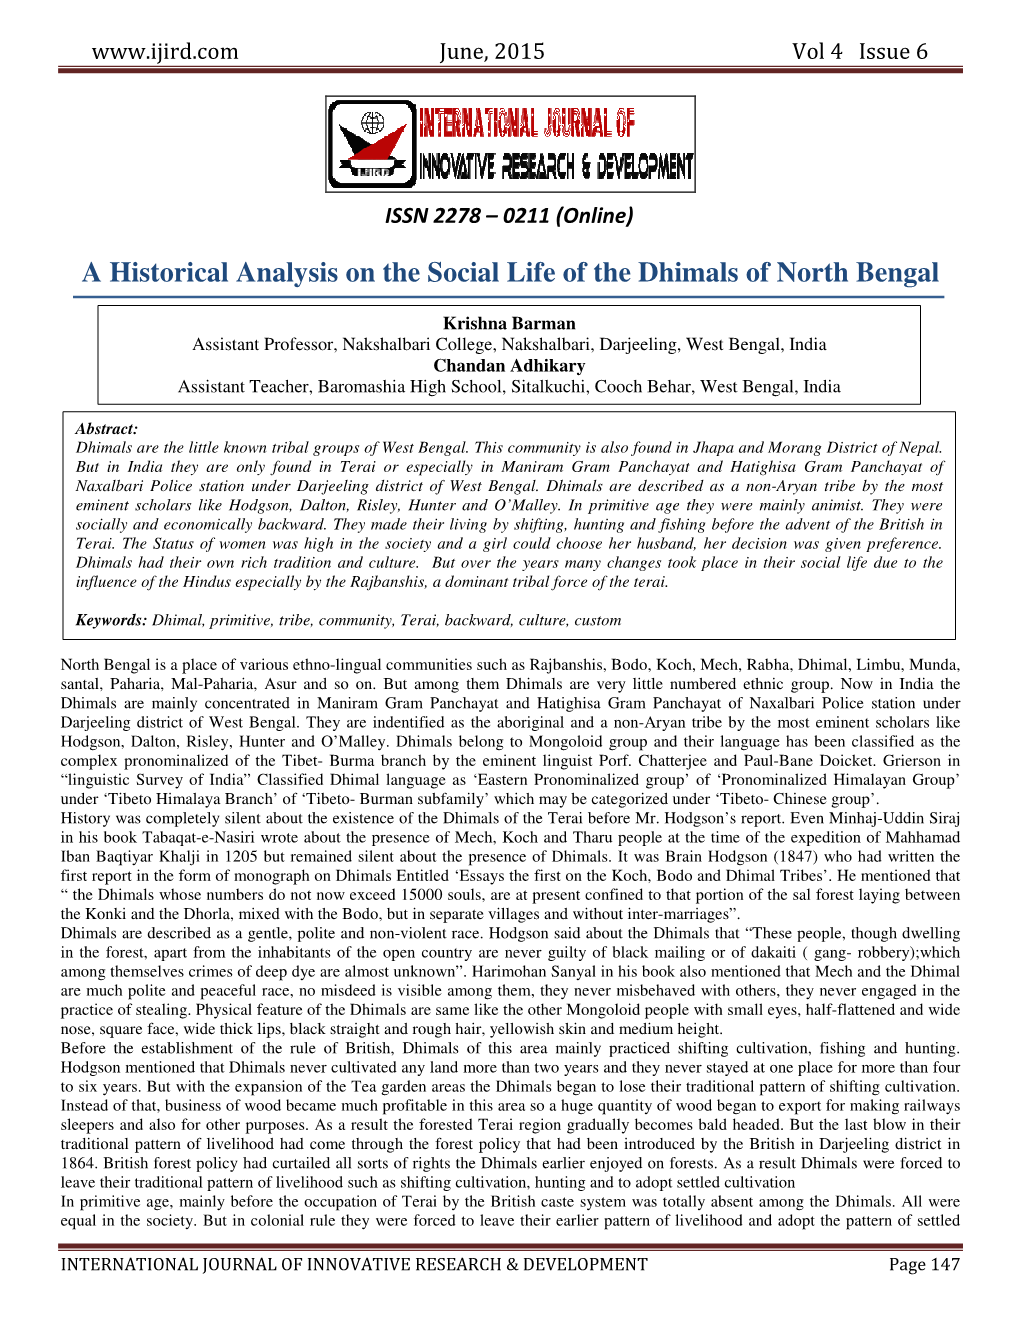 A Historical Analysis on the Social Life of the Dhimals of North Bengal